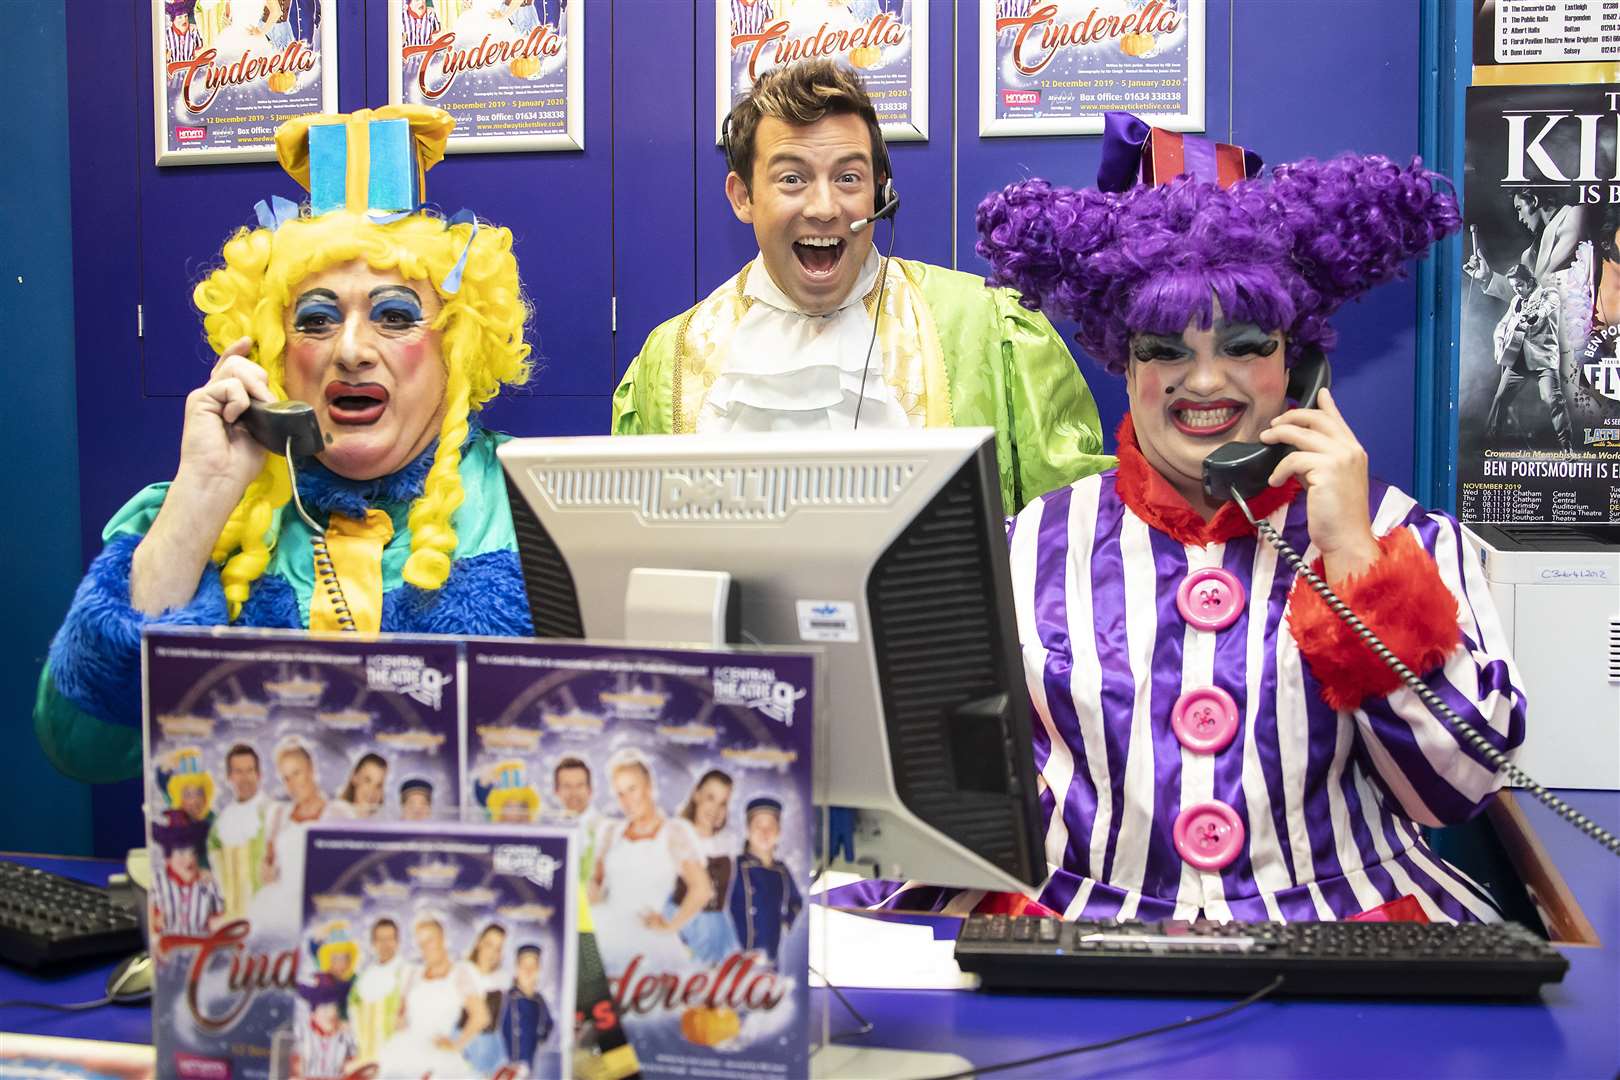 The ugly sisters mucking around with Dandini for the launch of Cinderella at The Central Theatre, Chatham (16880565)